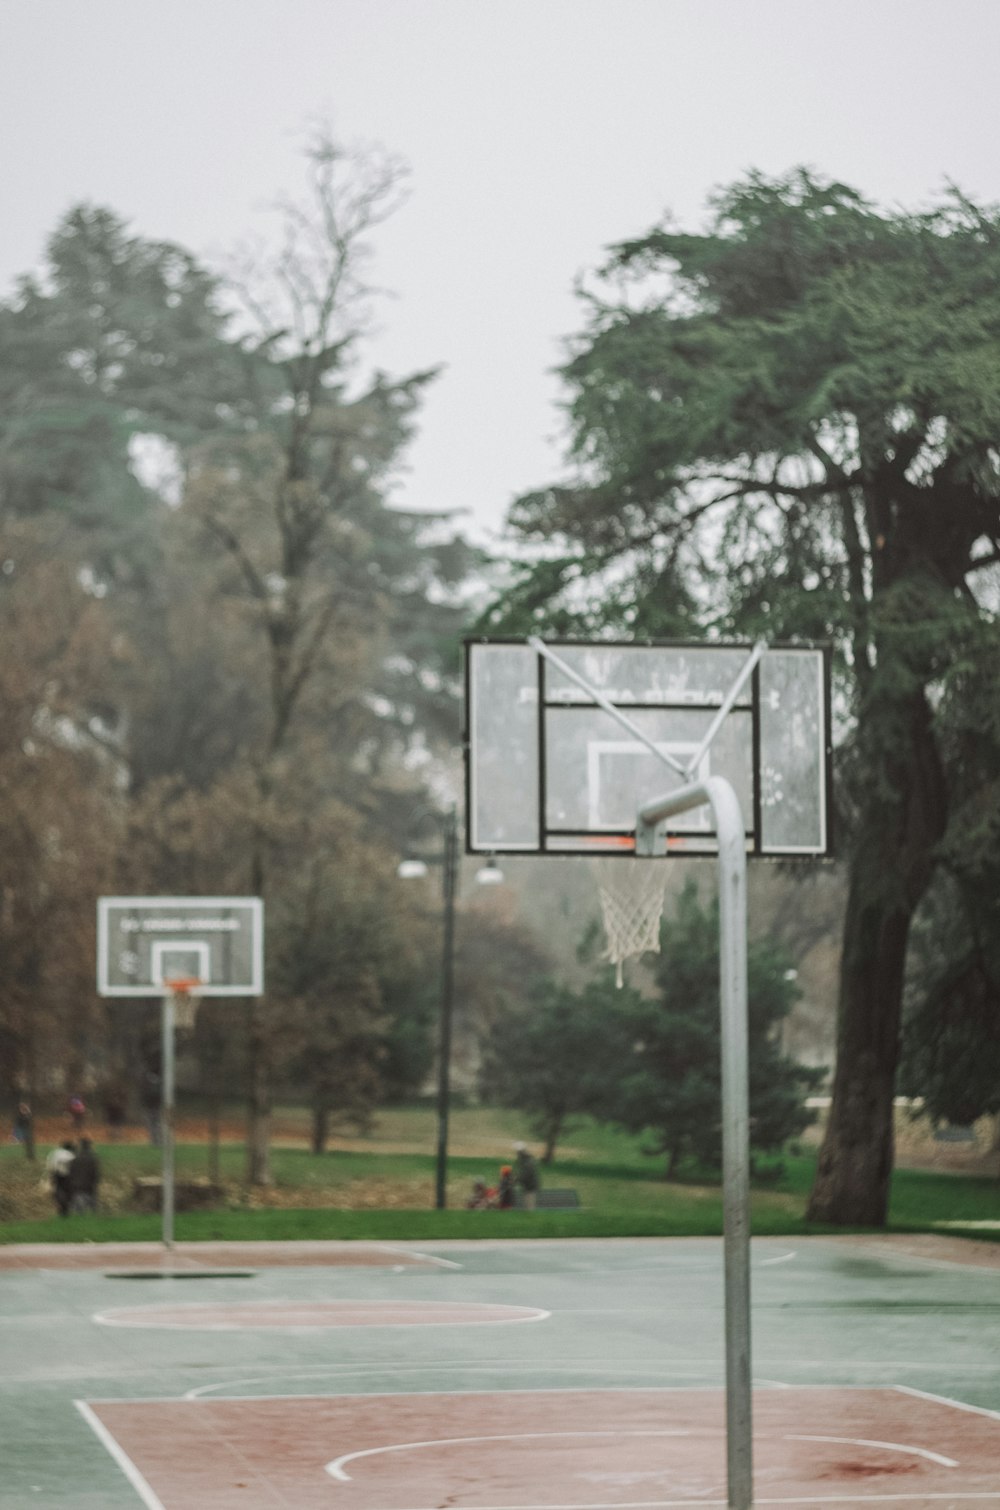 outdoor basketball court during daytime